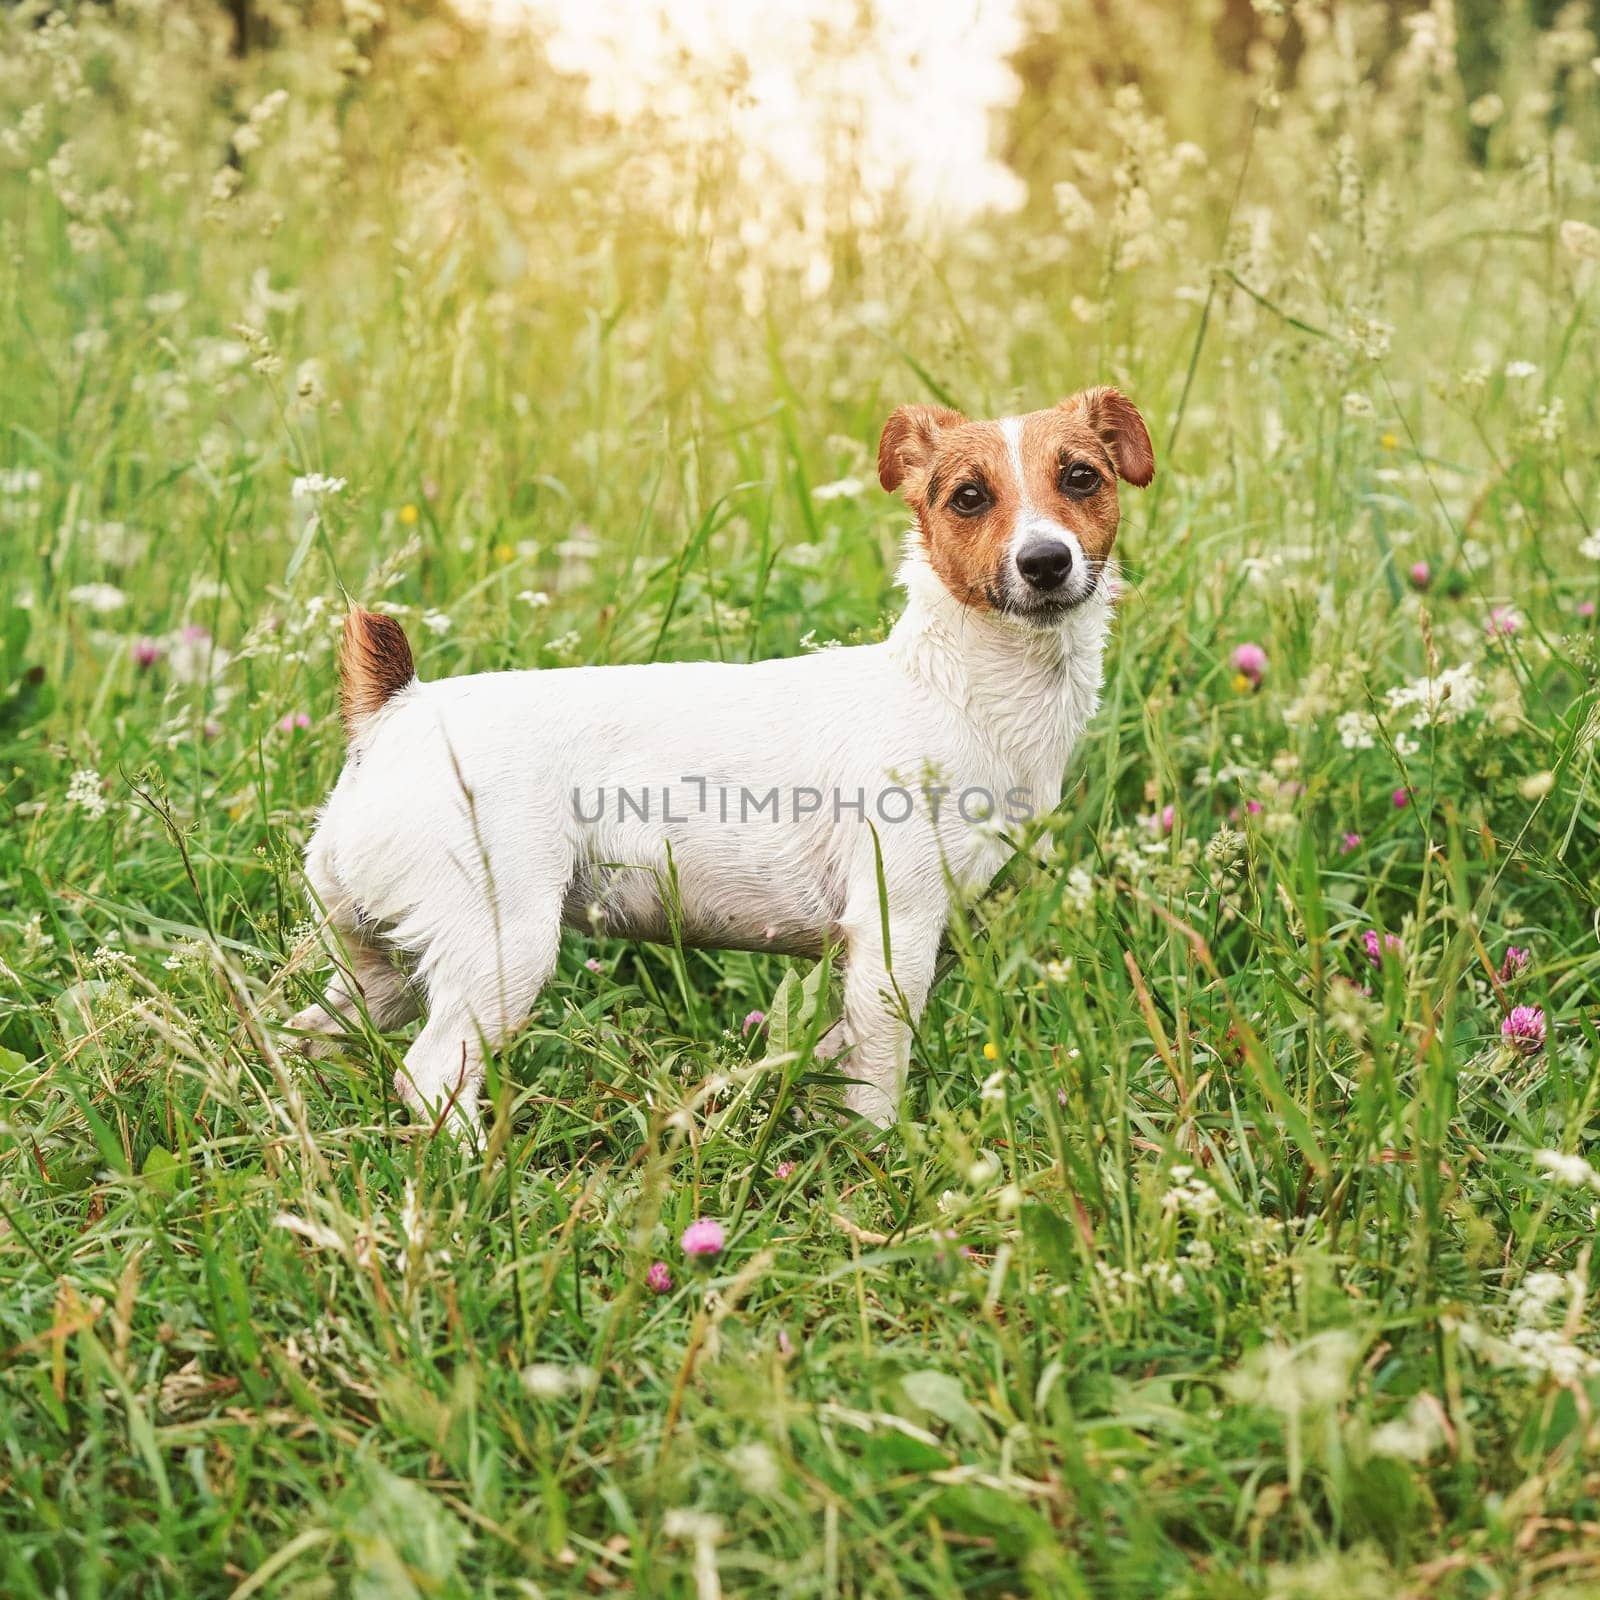 Jack Russell terrier dog standing in grass with flowers, her fur still wet from swimming, afternoon sun shines background